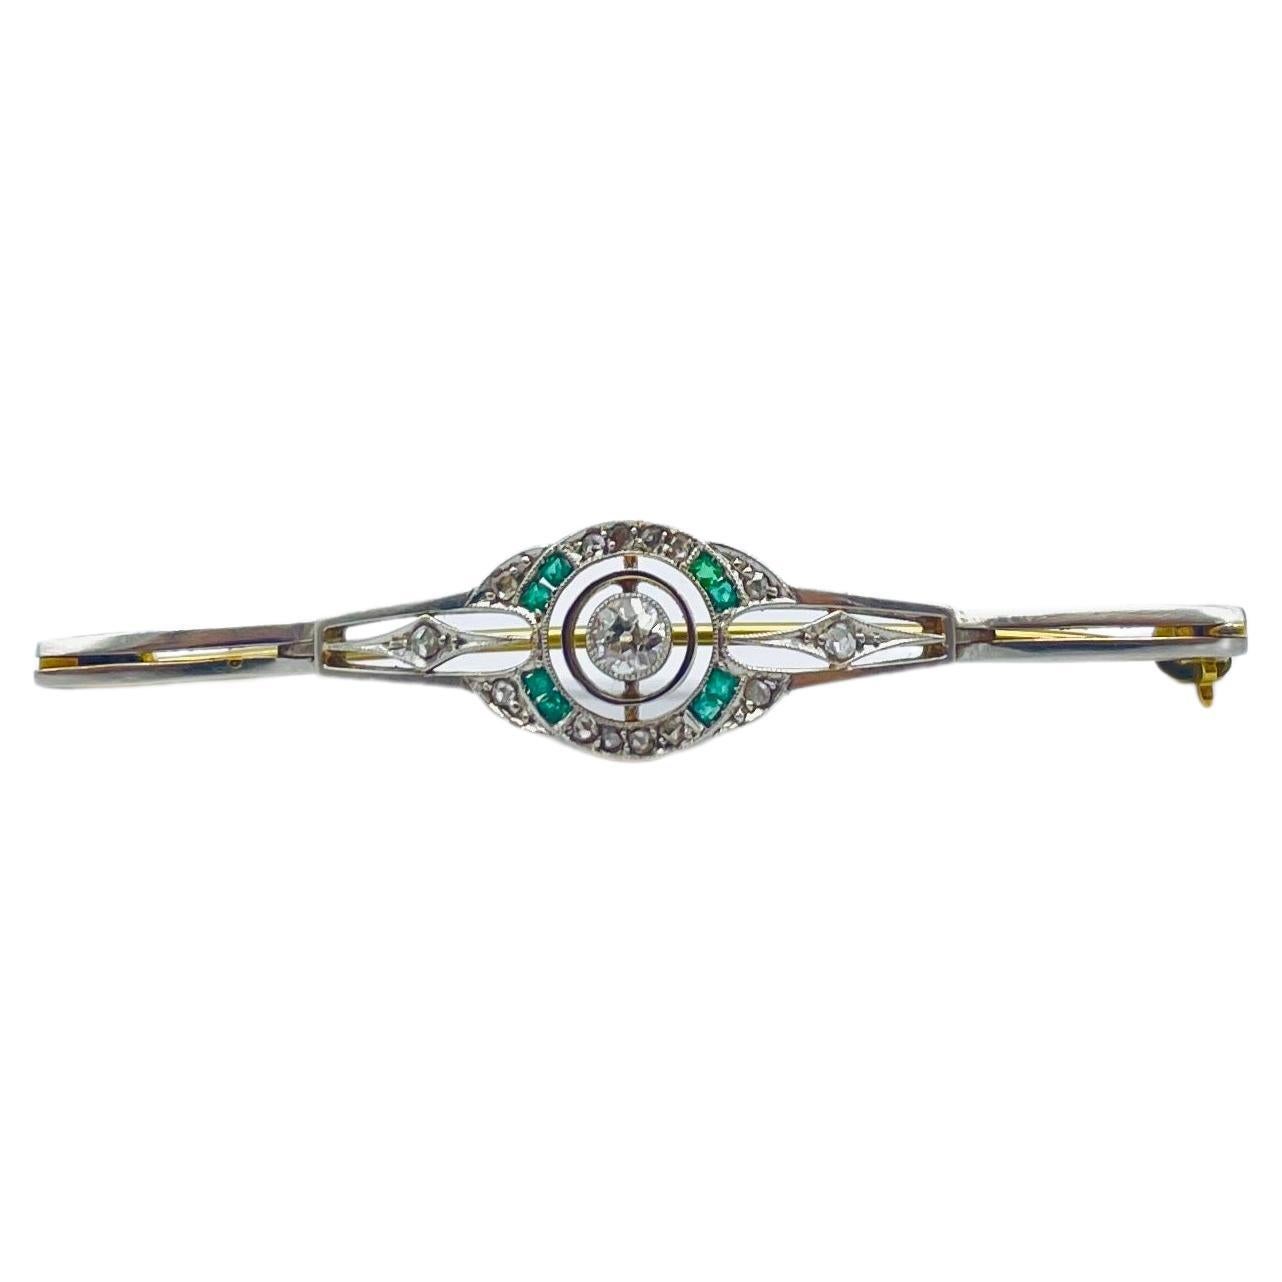 Art Deco brooche with diamond and emerald 14k gold